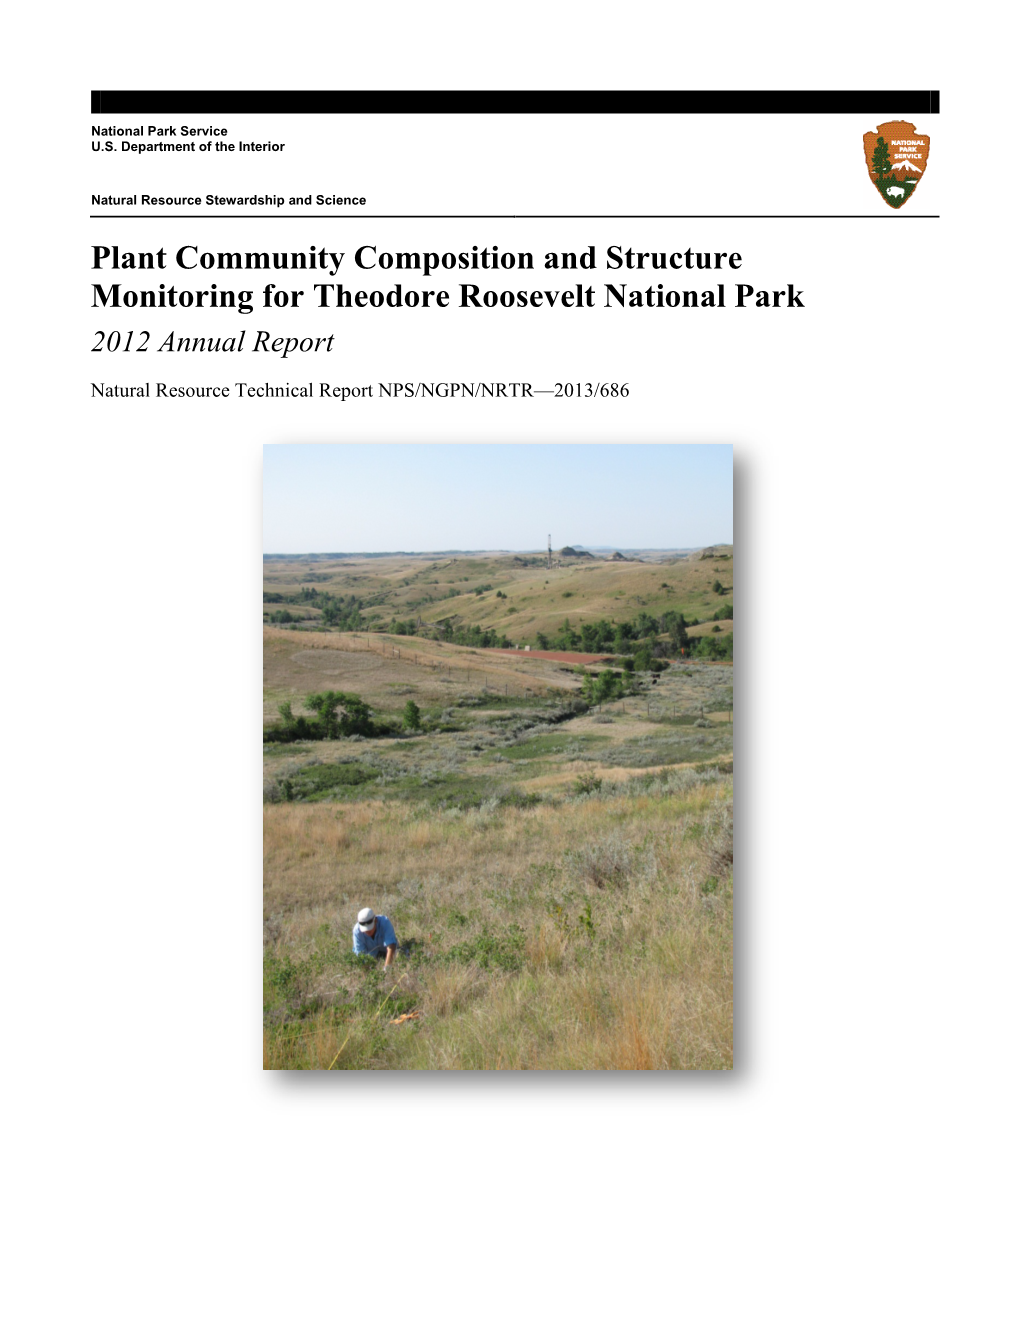 Plant Community Composition and Structure Monitoring for Theodore Roosevelt National Park 2012 Annual Report